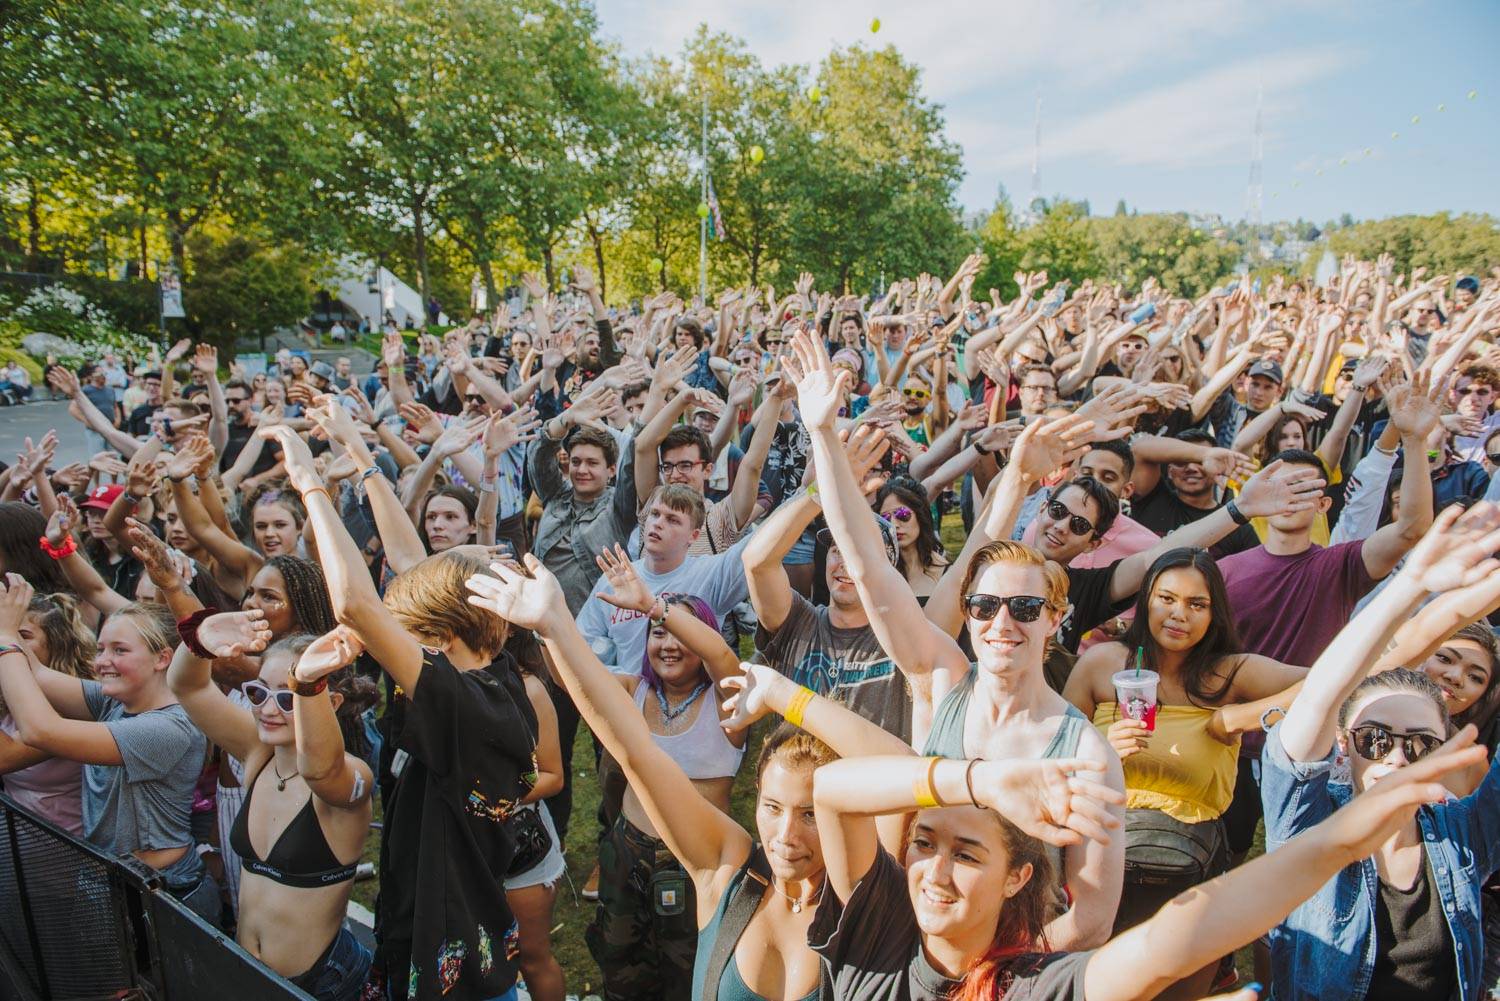 Music fans at the Bumbershoot Music Festival 2018 - Part 1 - The Snipe News